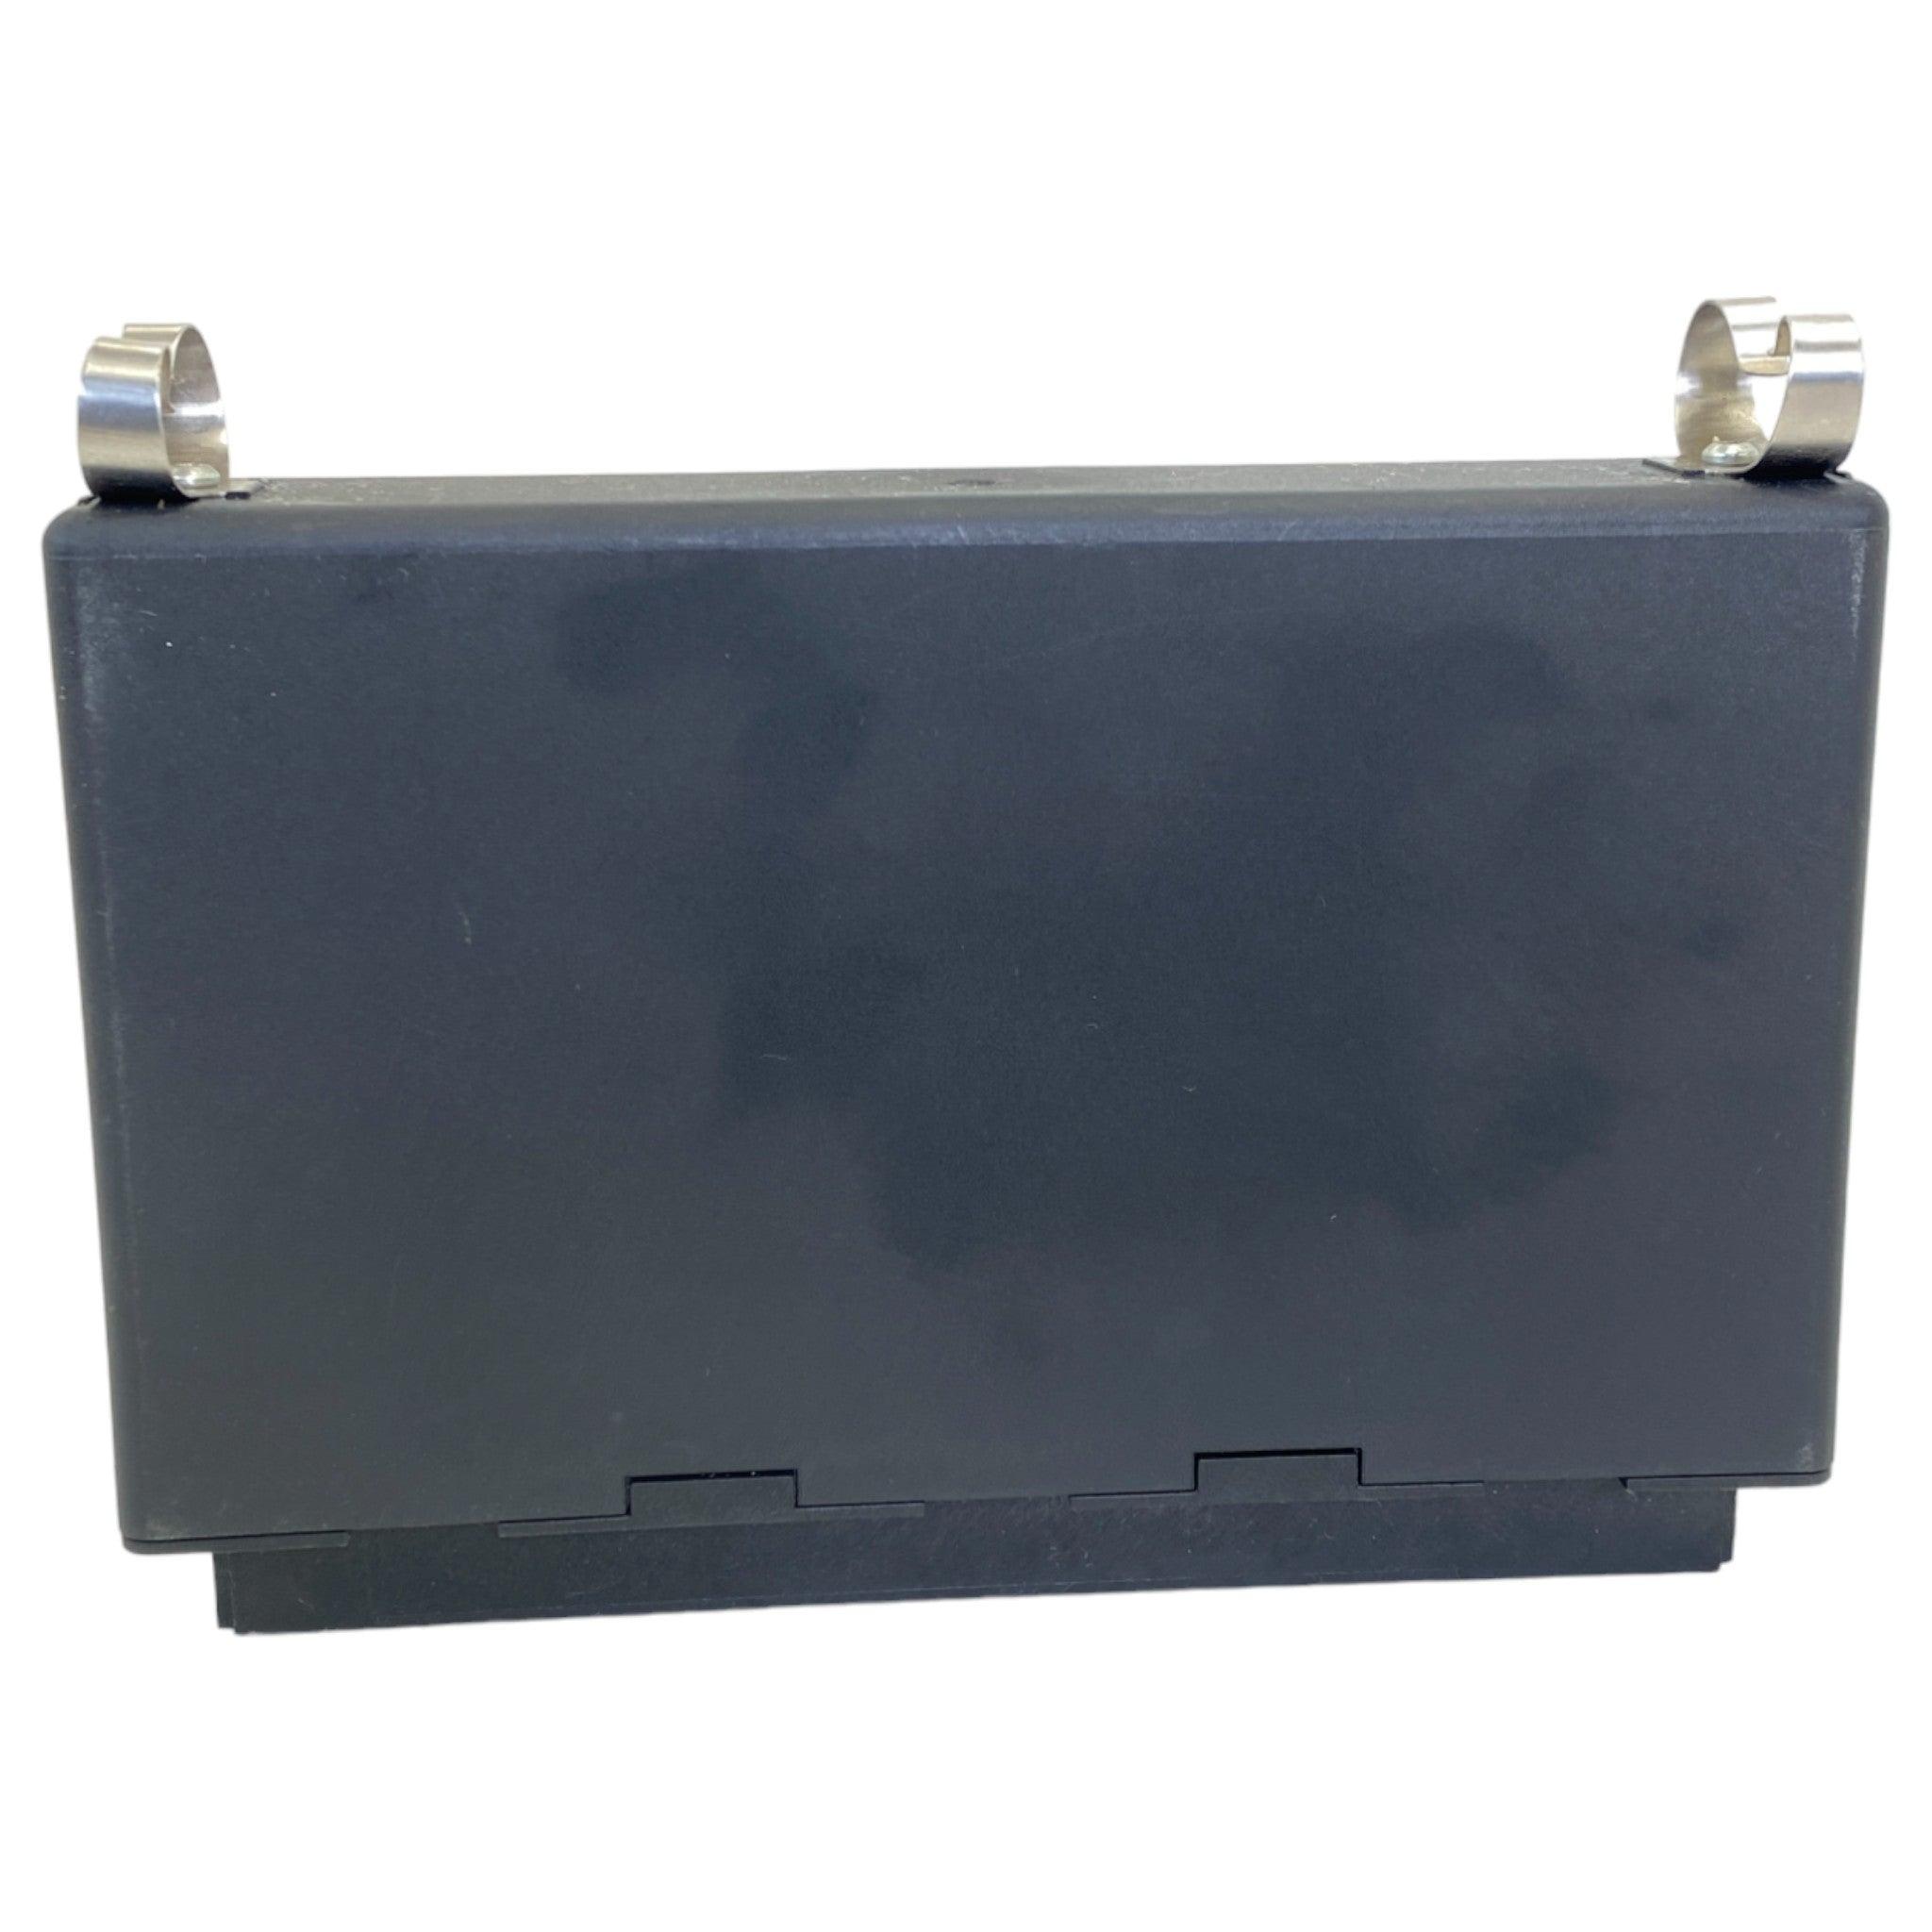 A0024468202 Genuine Freightliner® Cpc2 Electronic Chassis Control Module - ADVANCED TRUCK PARTS